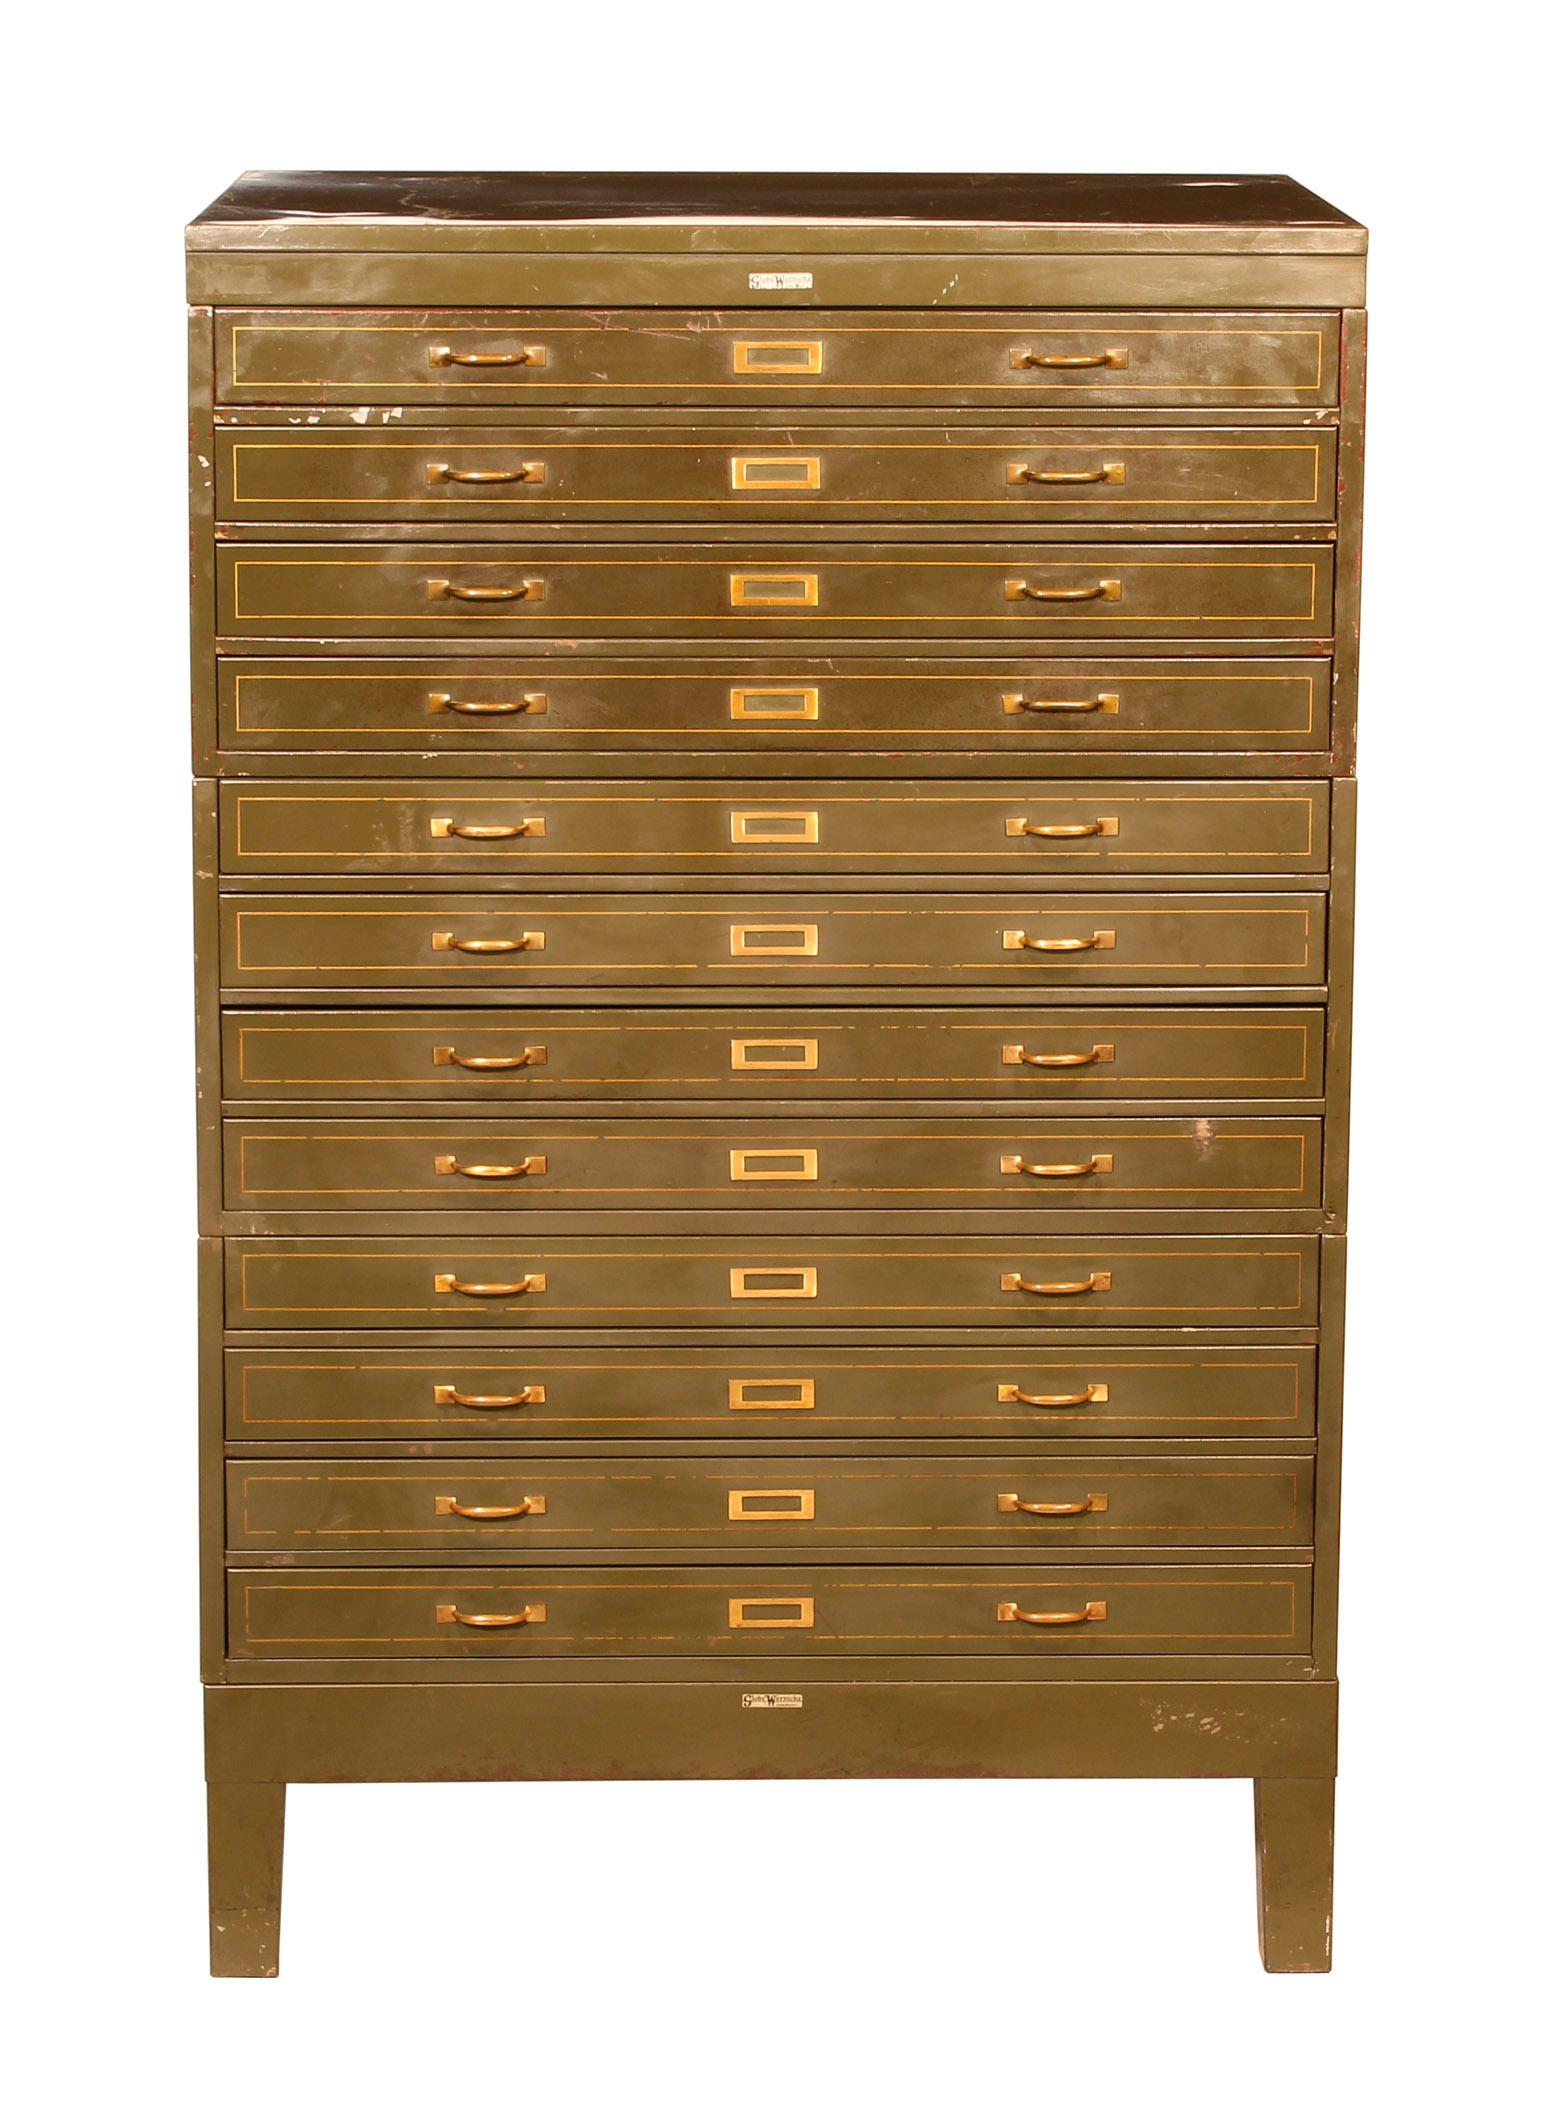 Vintage steel flat file blueprint / architect cabinet by Globe Wernicke. Features twelve drawers, brass handles and name plates. Beautifully worn army green paint with gold pin-striping. Can even see the coat of red primer underneath. Flat-file is